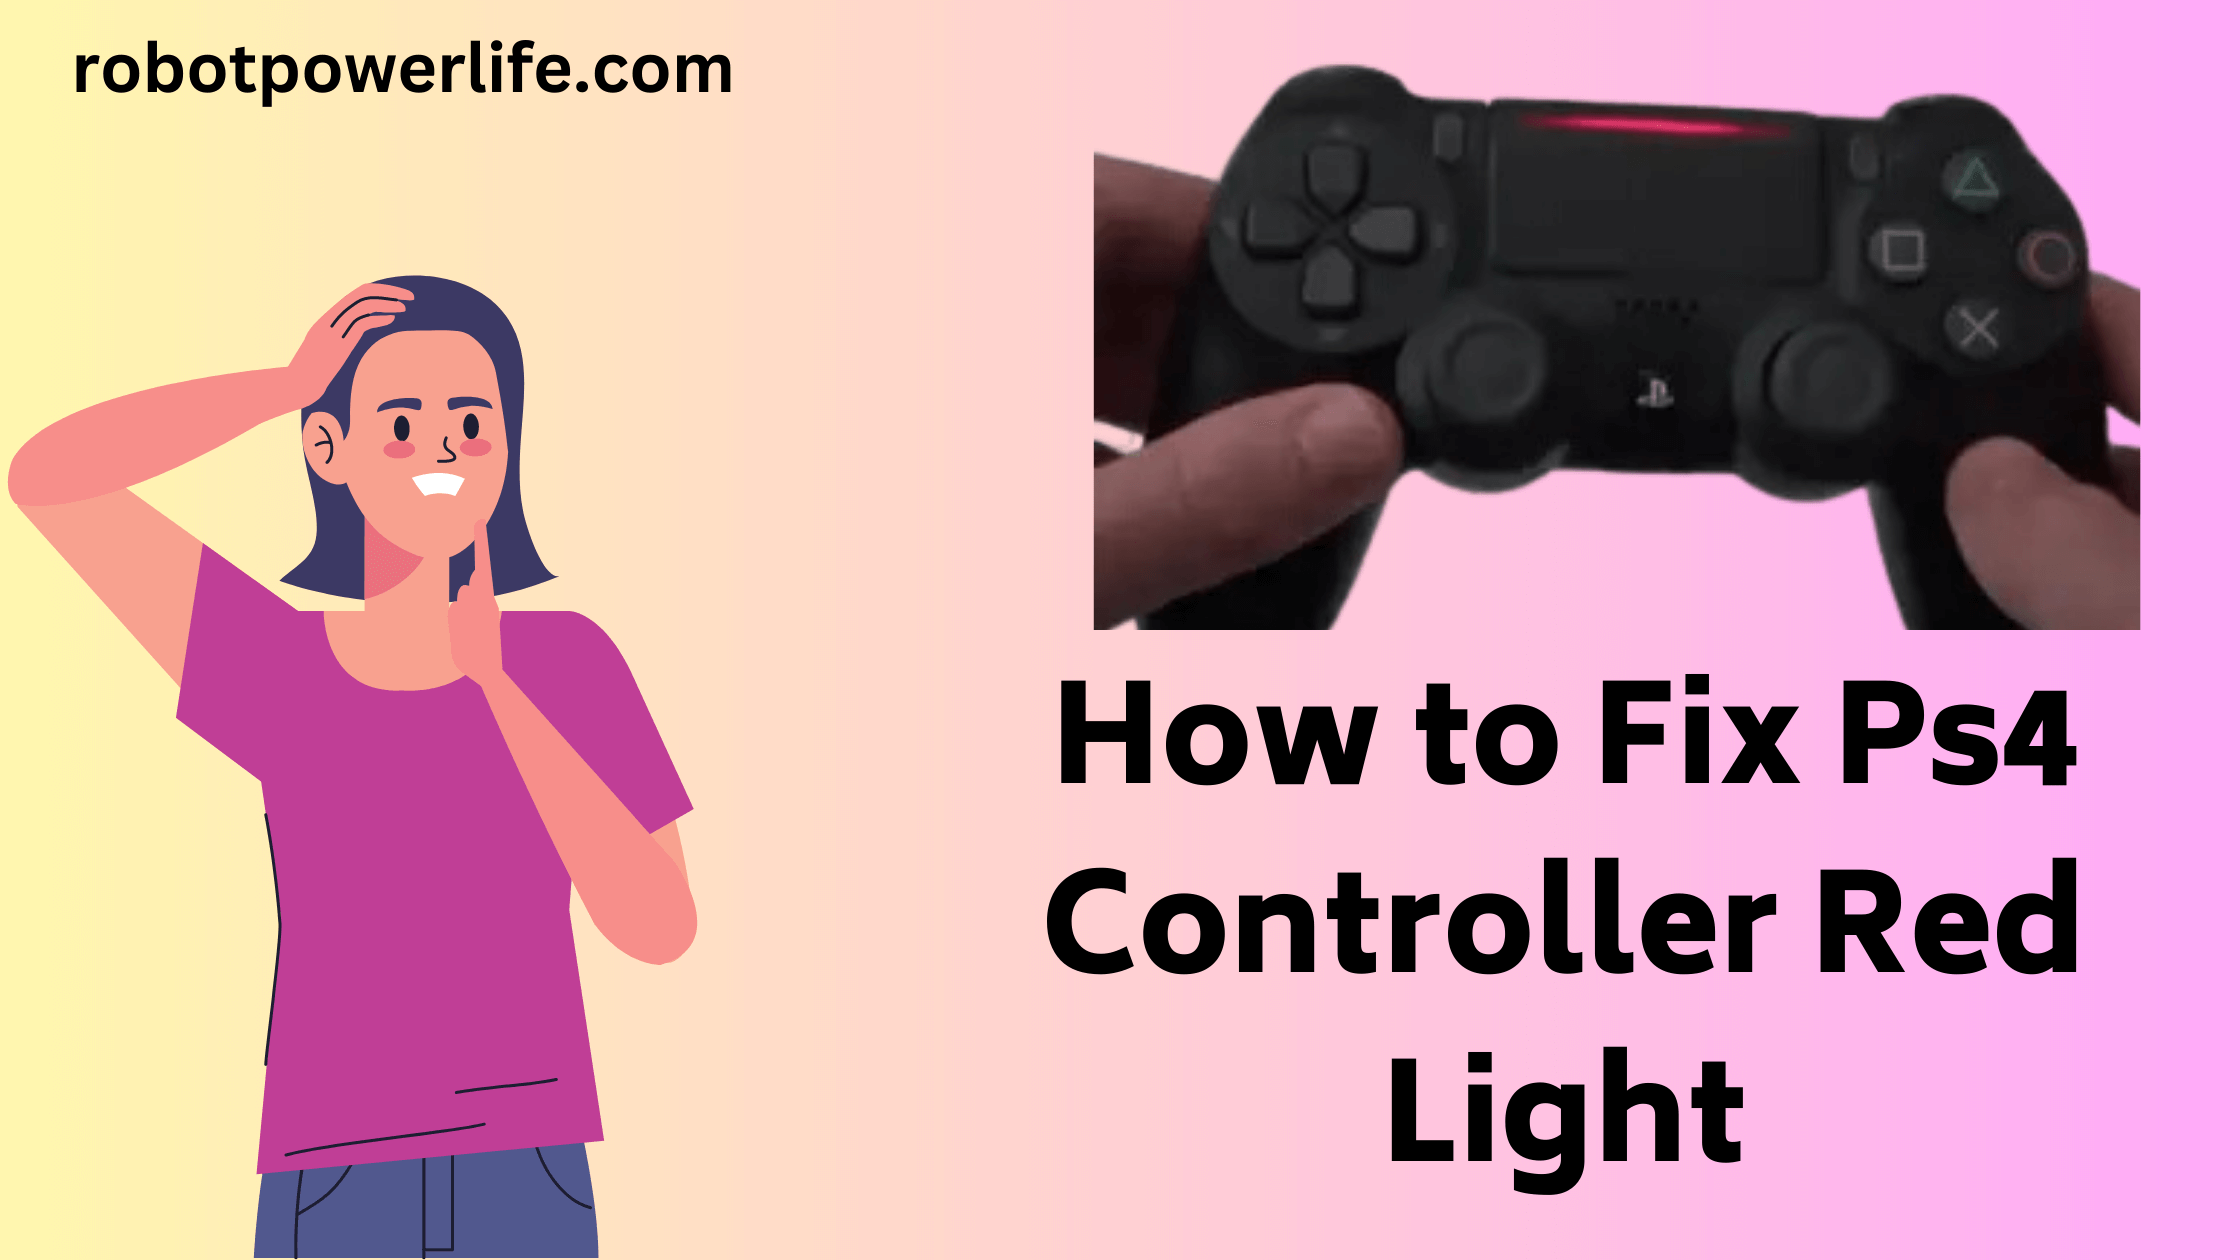 How to Fix Ps4 Controller Red Light